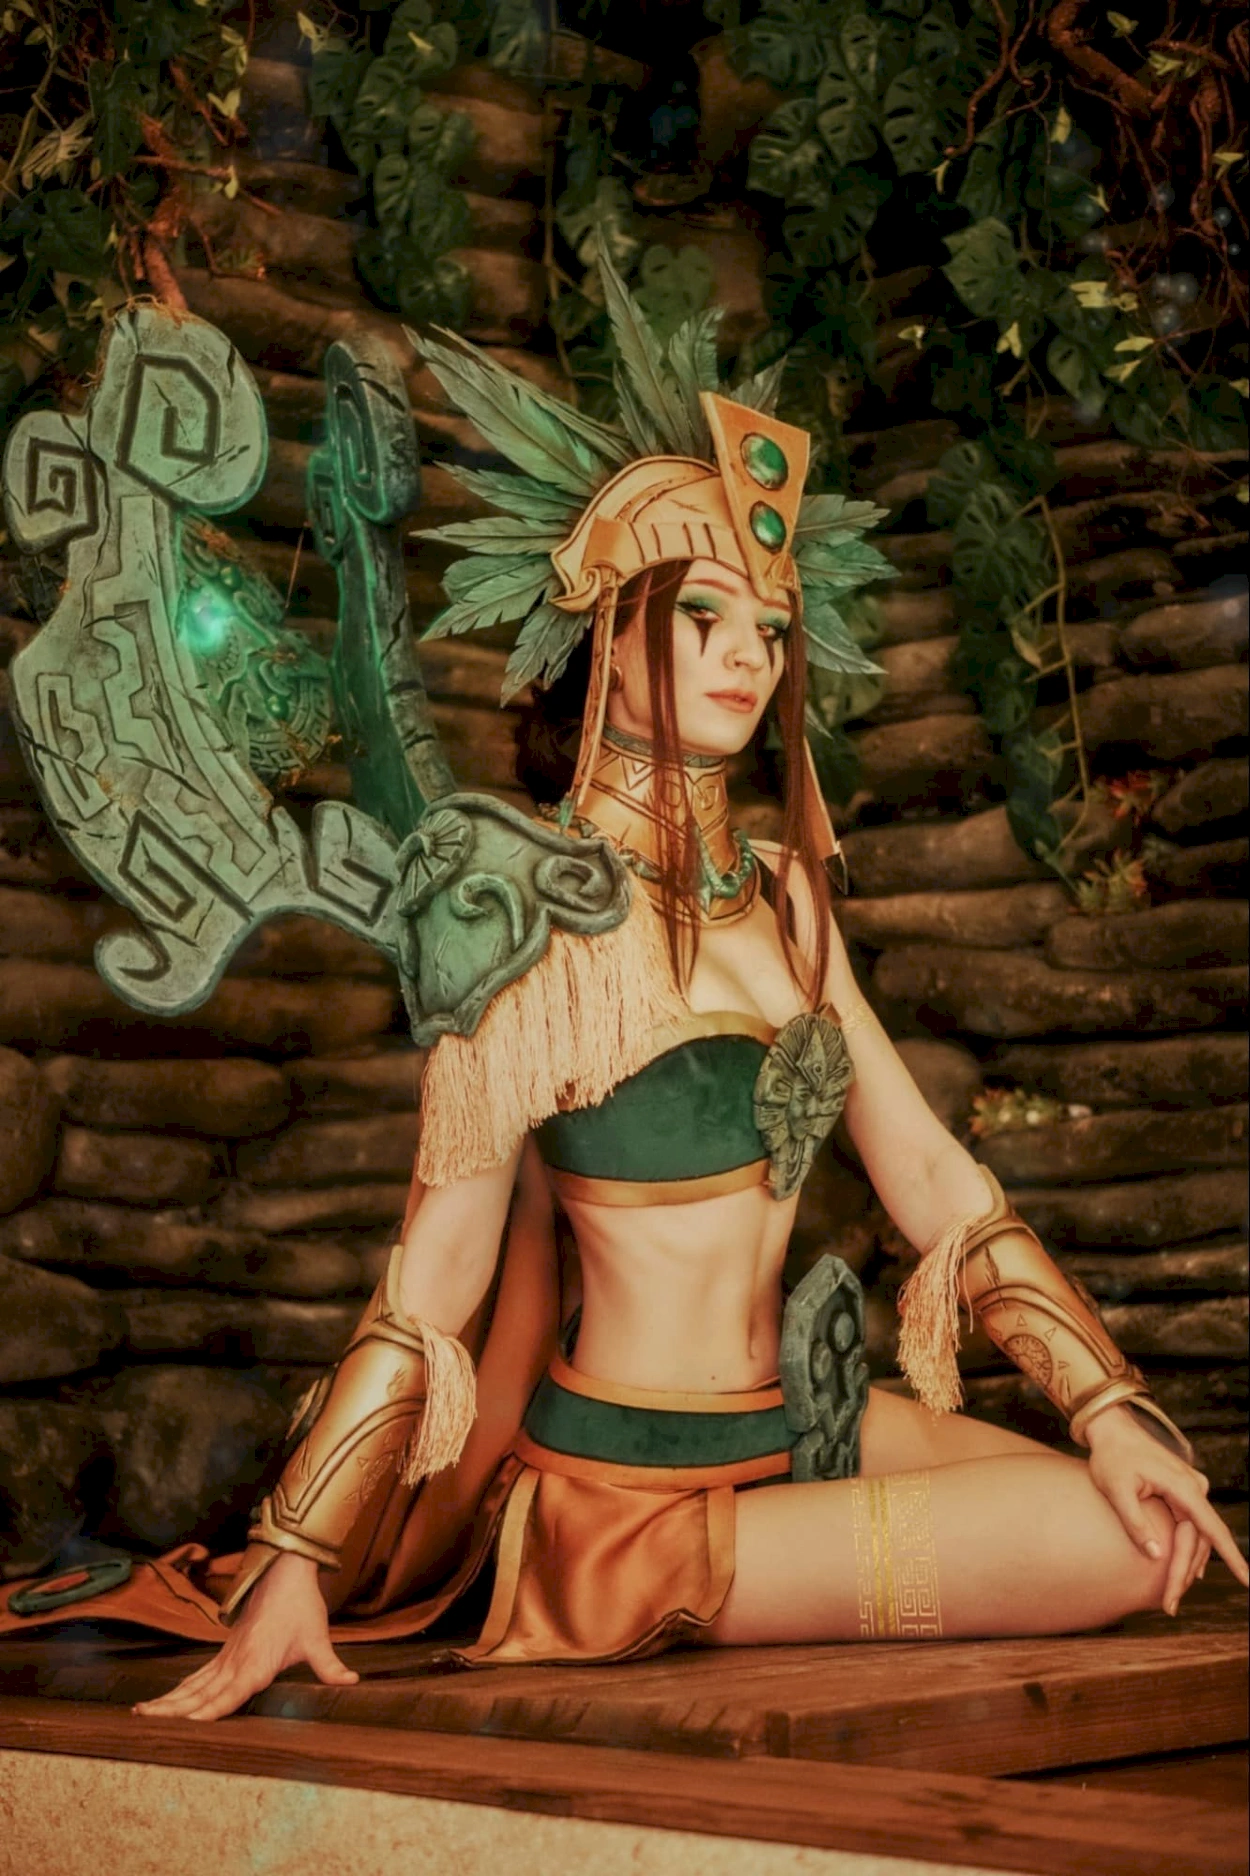 A cosplay of the Aztec Princess from Civilization Online #2